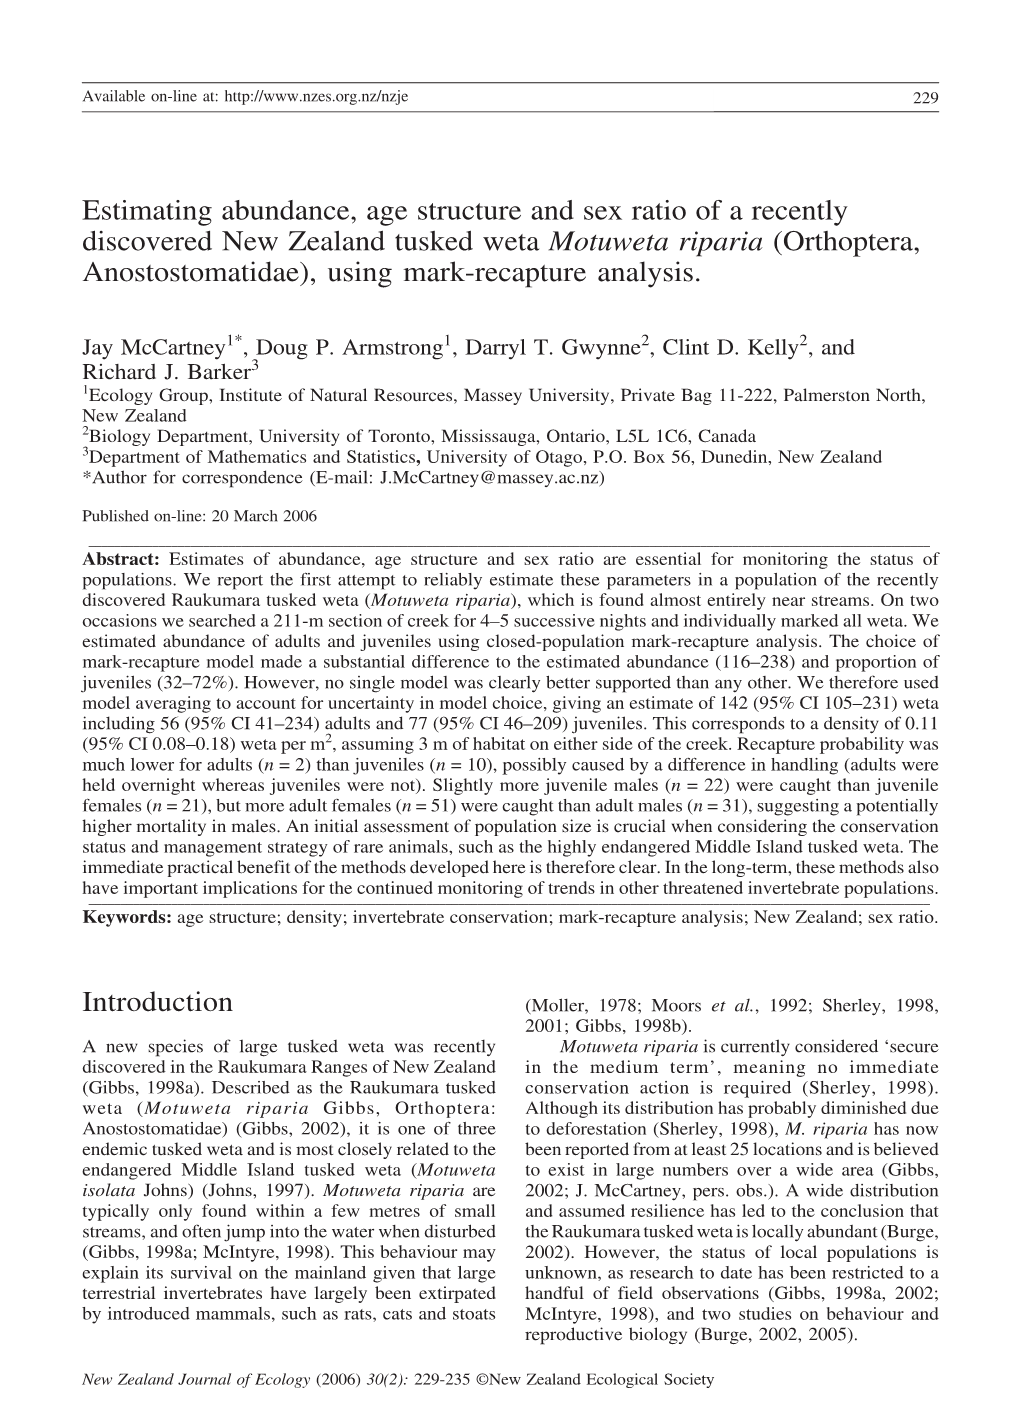 Estimating Abundance, Age Structure and Sex Ratio of a Recently Discovered New Zealand Tusked Weta Motuweta Riparia (Orthoptera